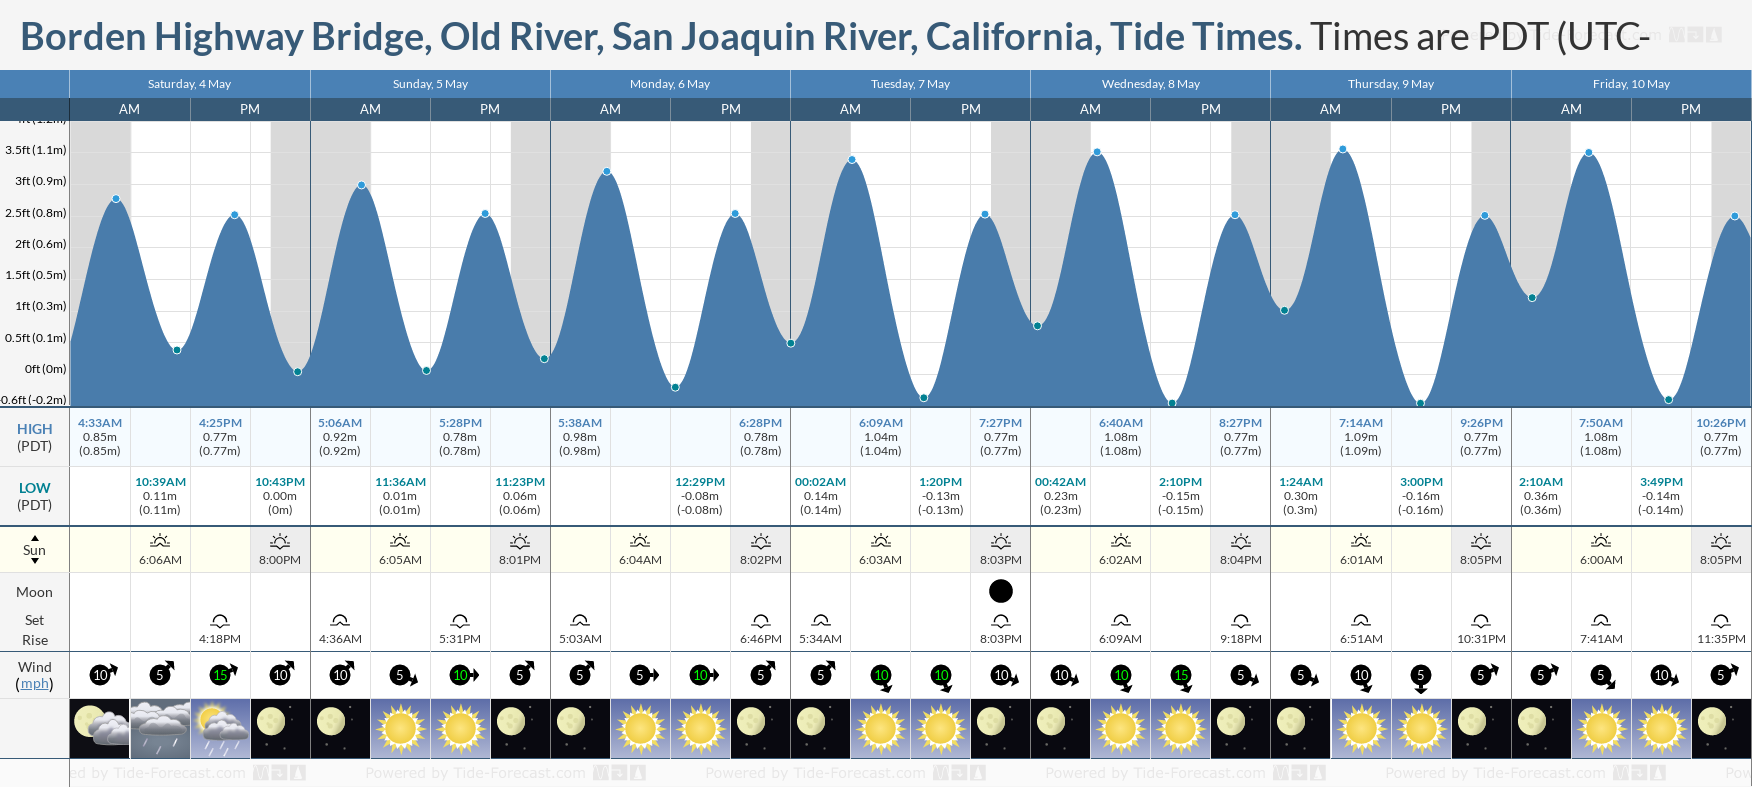 Borden Highway Bridge, Old River, San Joaquin River, California Tide Chart including high and low tide tide times for the next 7 days